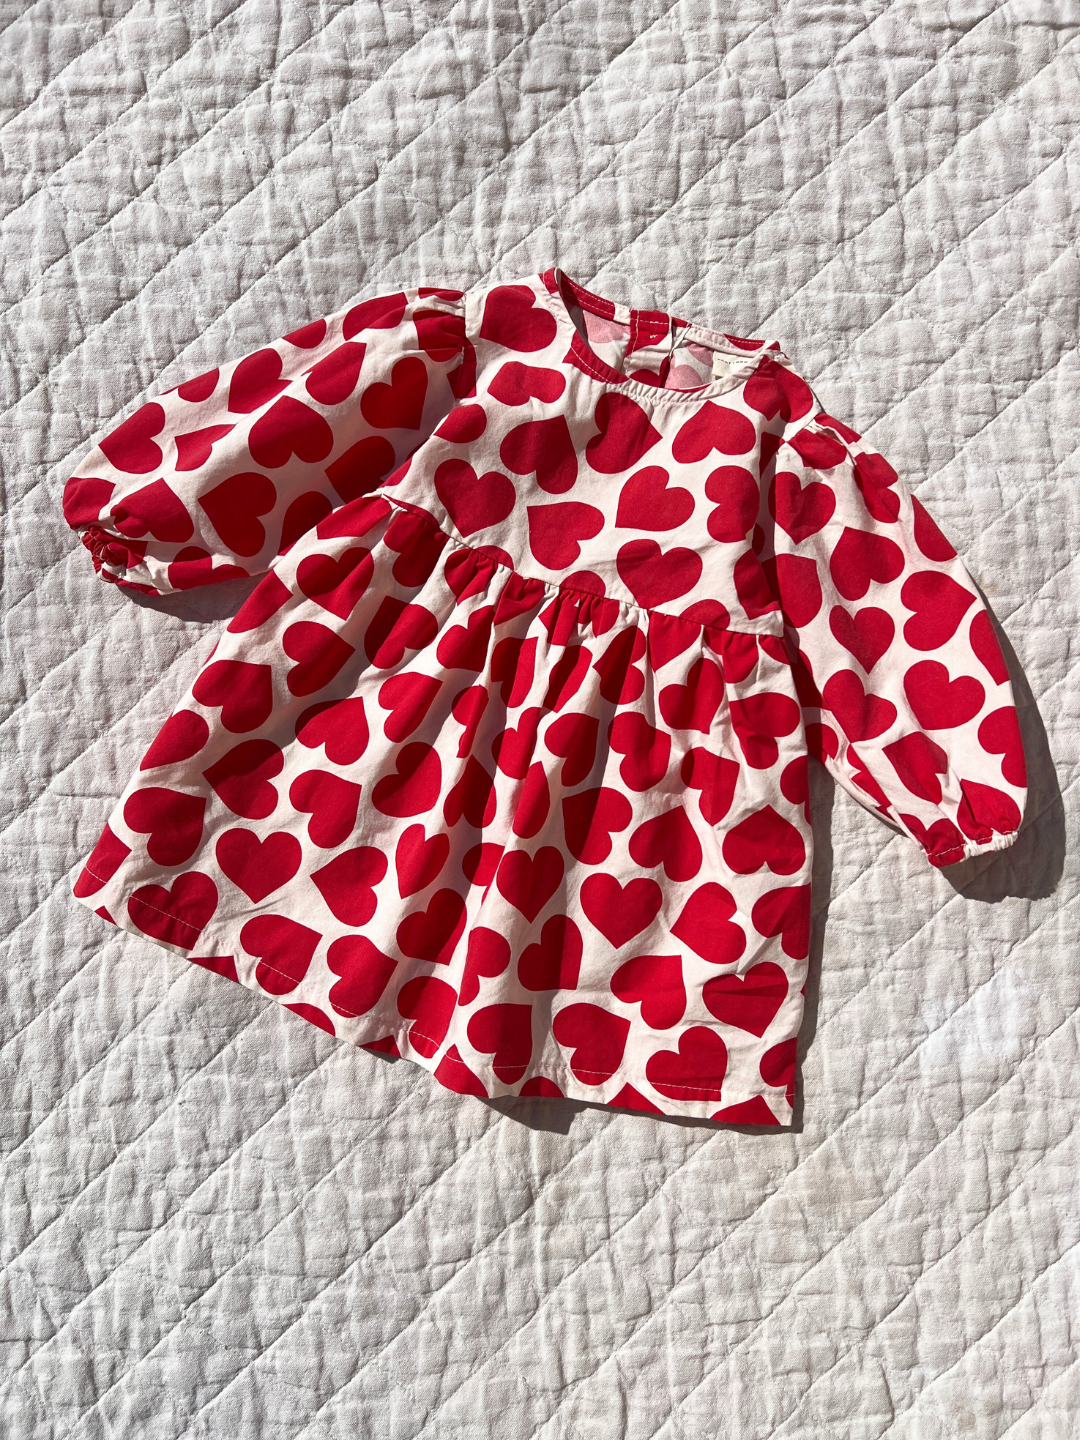 Kids dress in white with red hearts printed closely all over, with a round neck, high waist, long puffed sleeves and a loose, voluminous shape. Shown lying on an off-white quilt in sunlight.